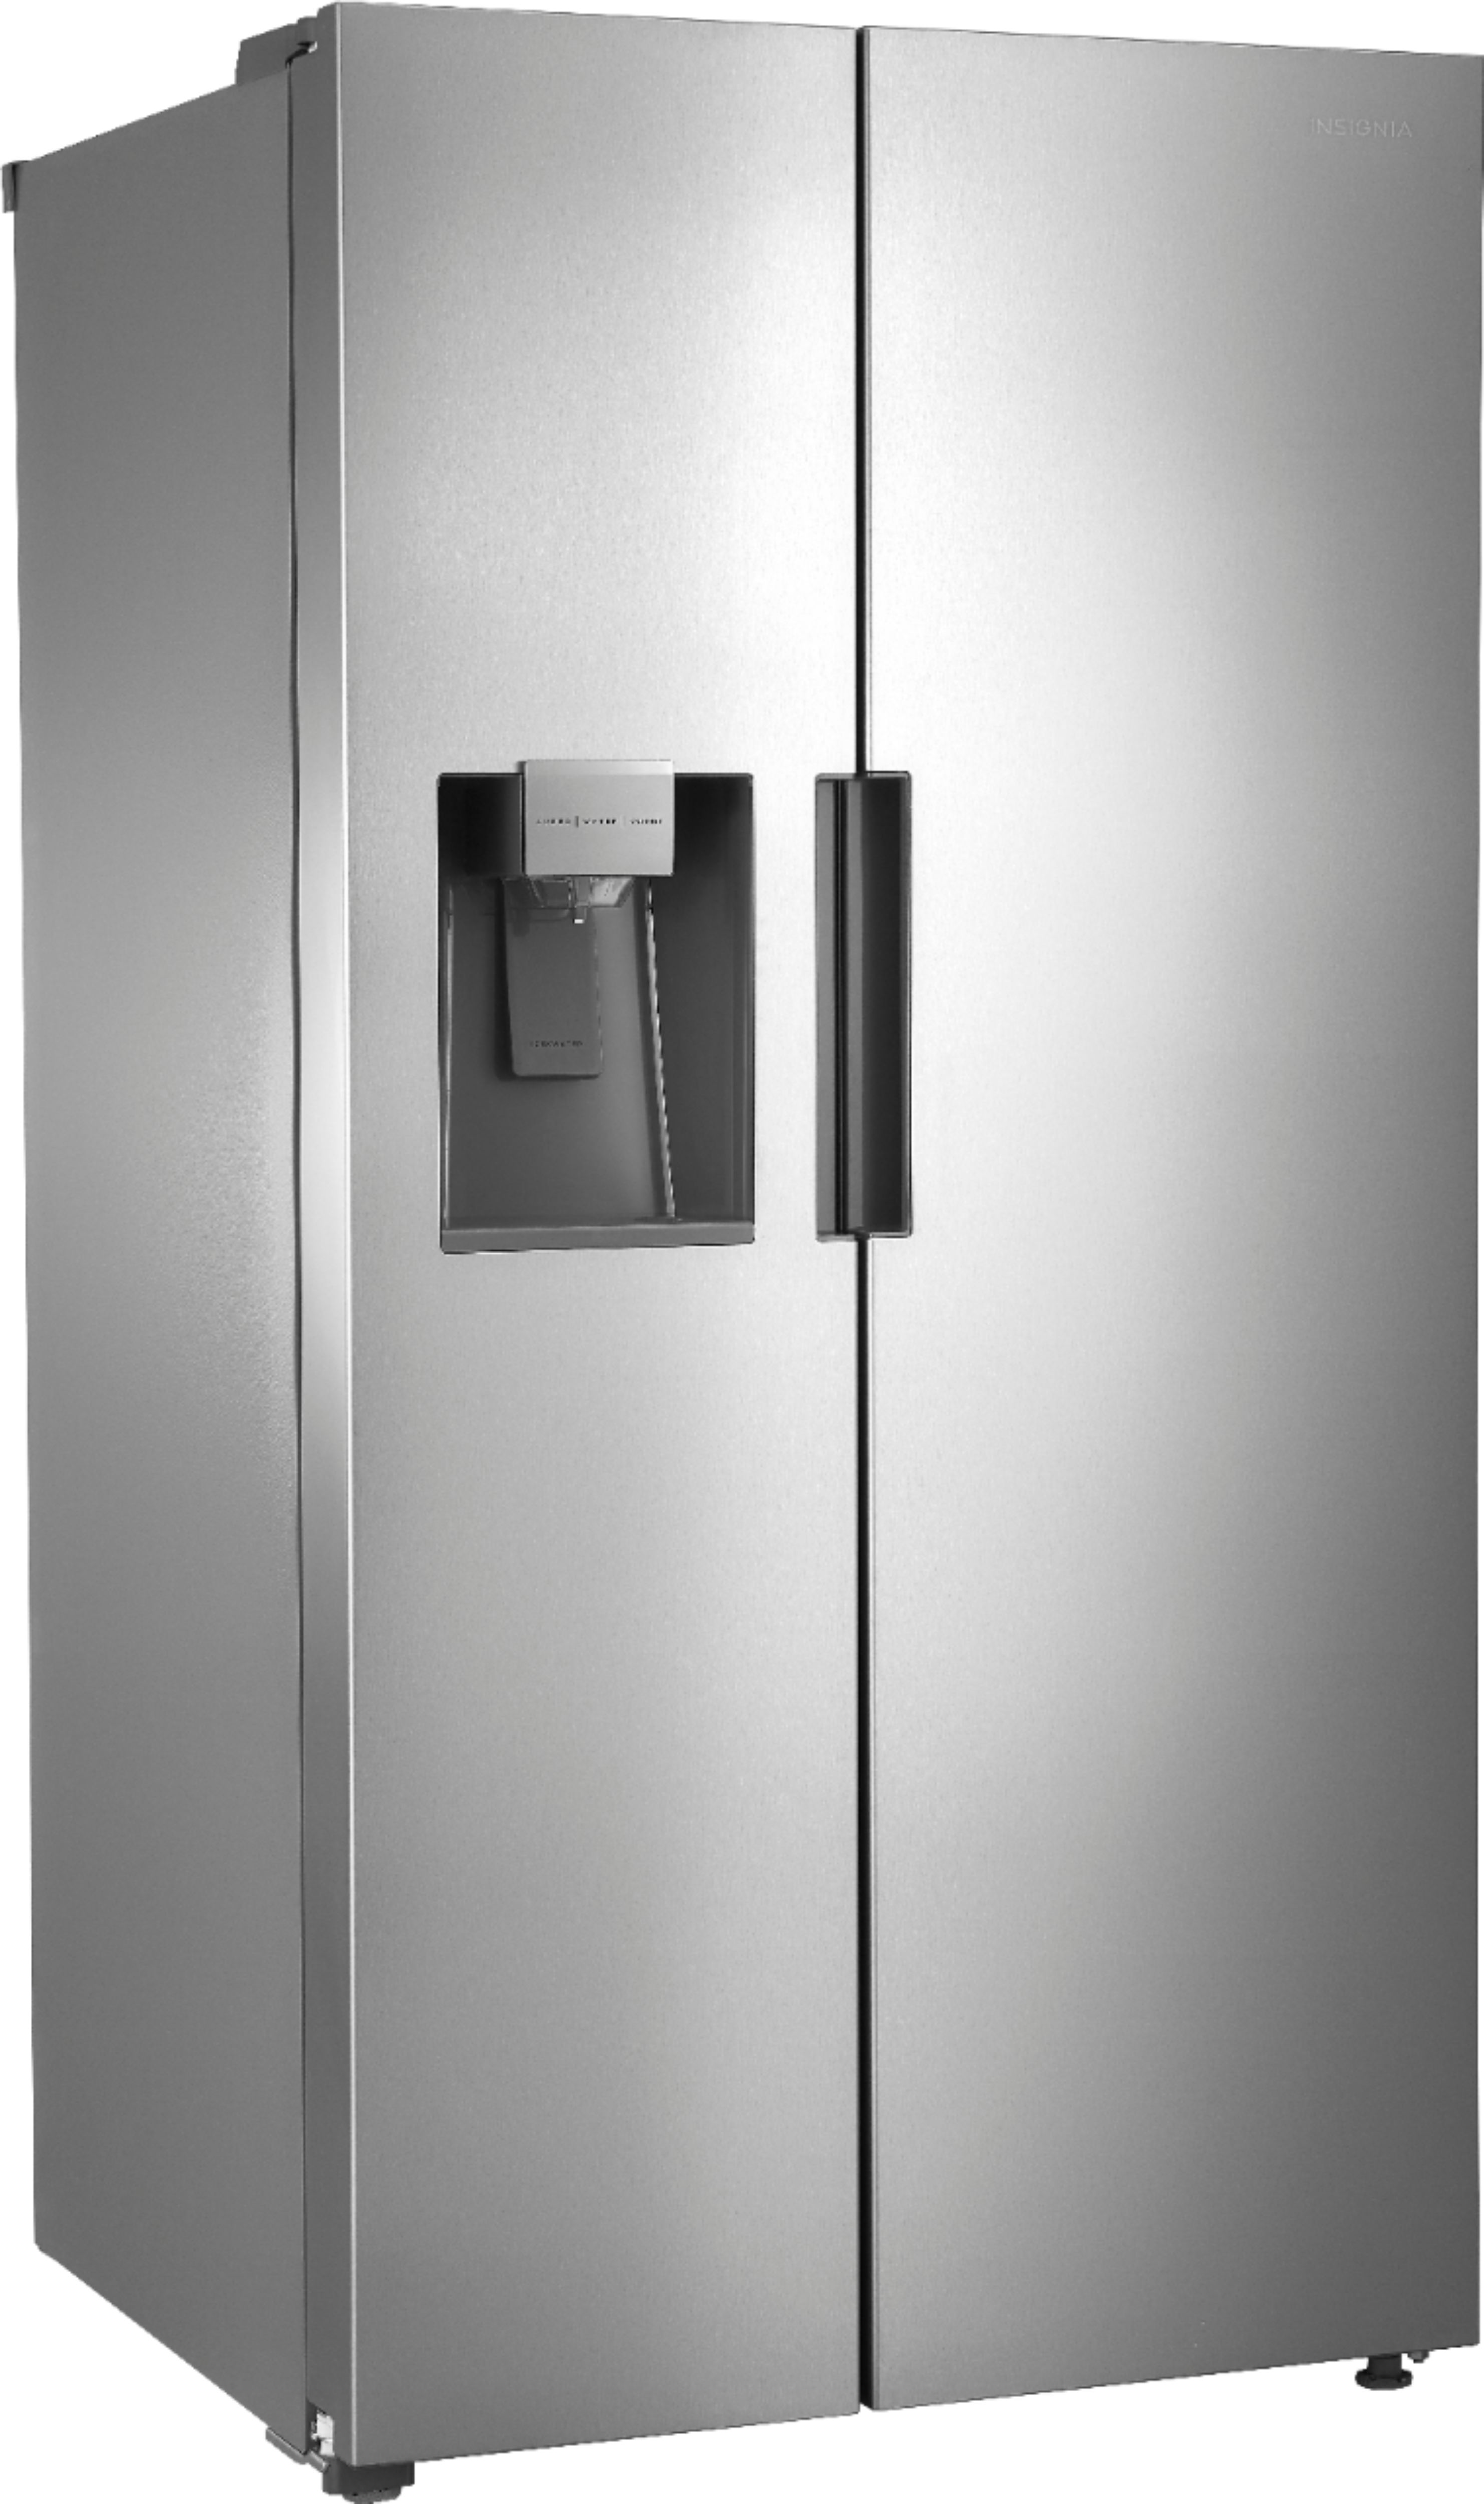 Angle View: Viking - Professional 5 Series Quiet Cool 22.8 Cu. Ft. Built-In Refrigerator - Arctic gray